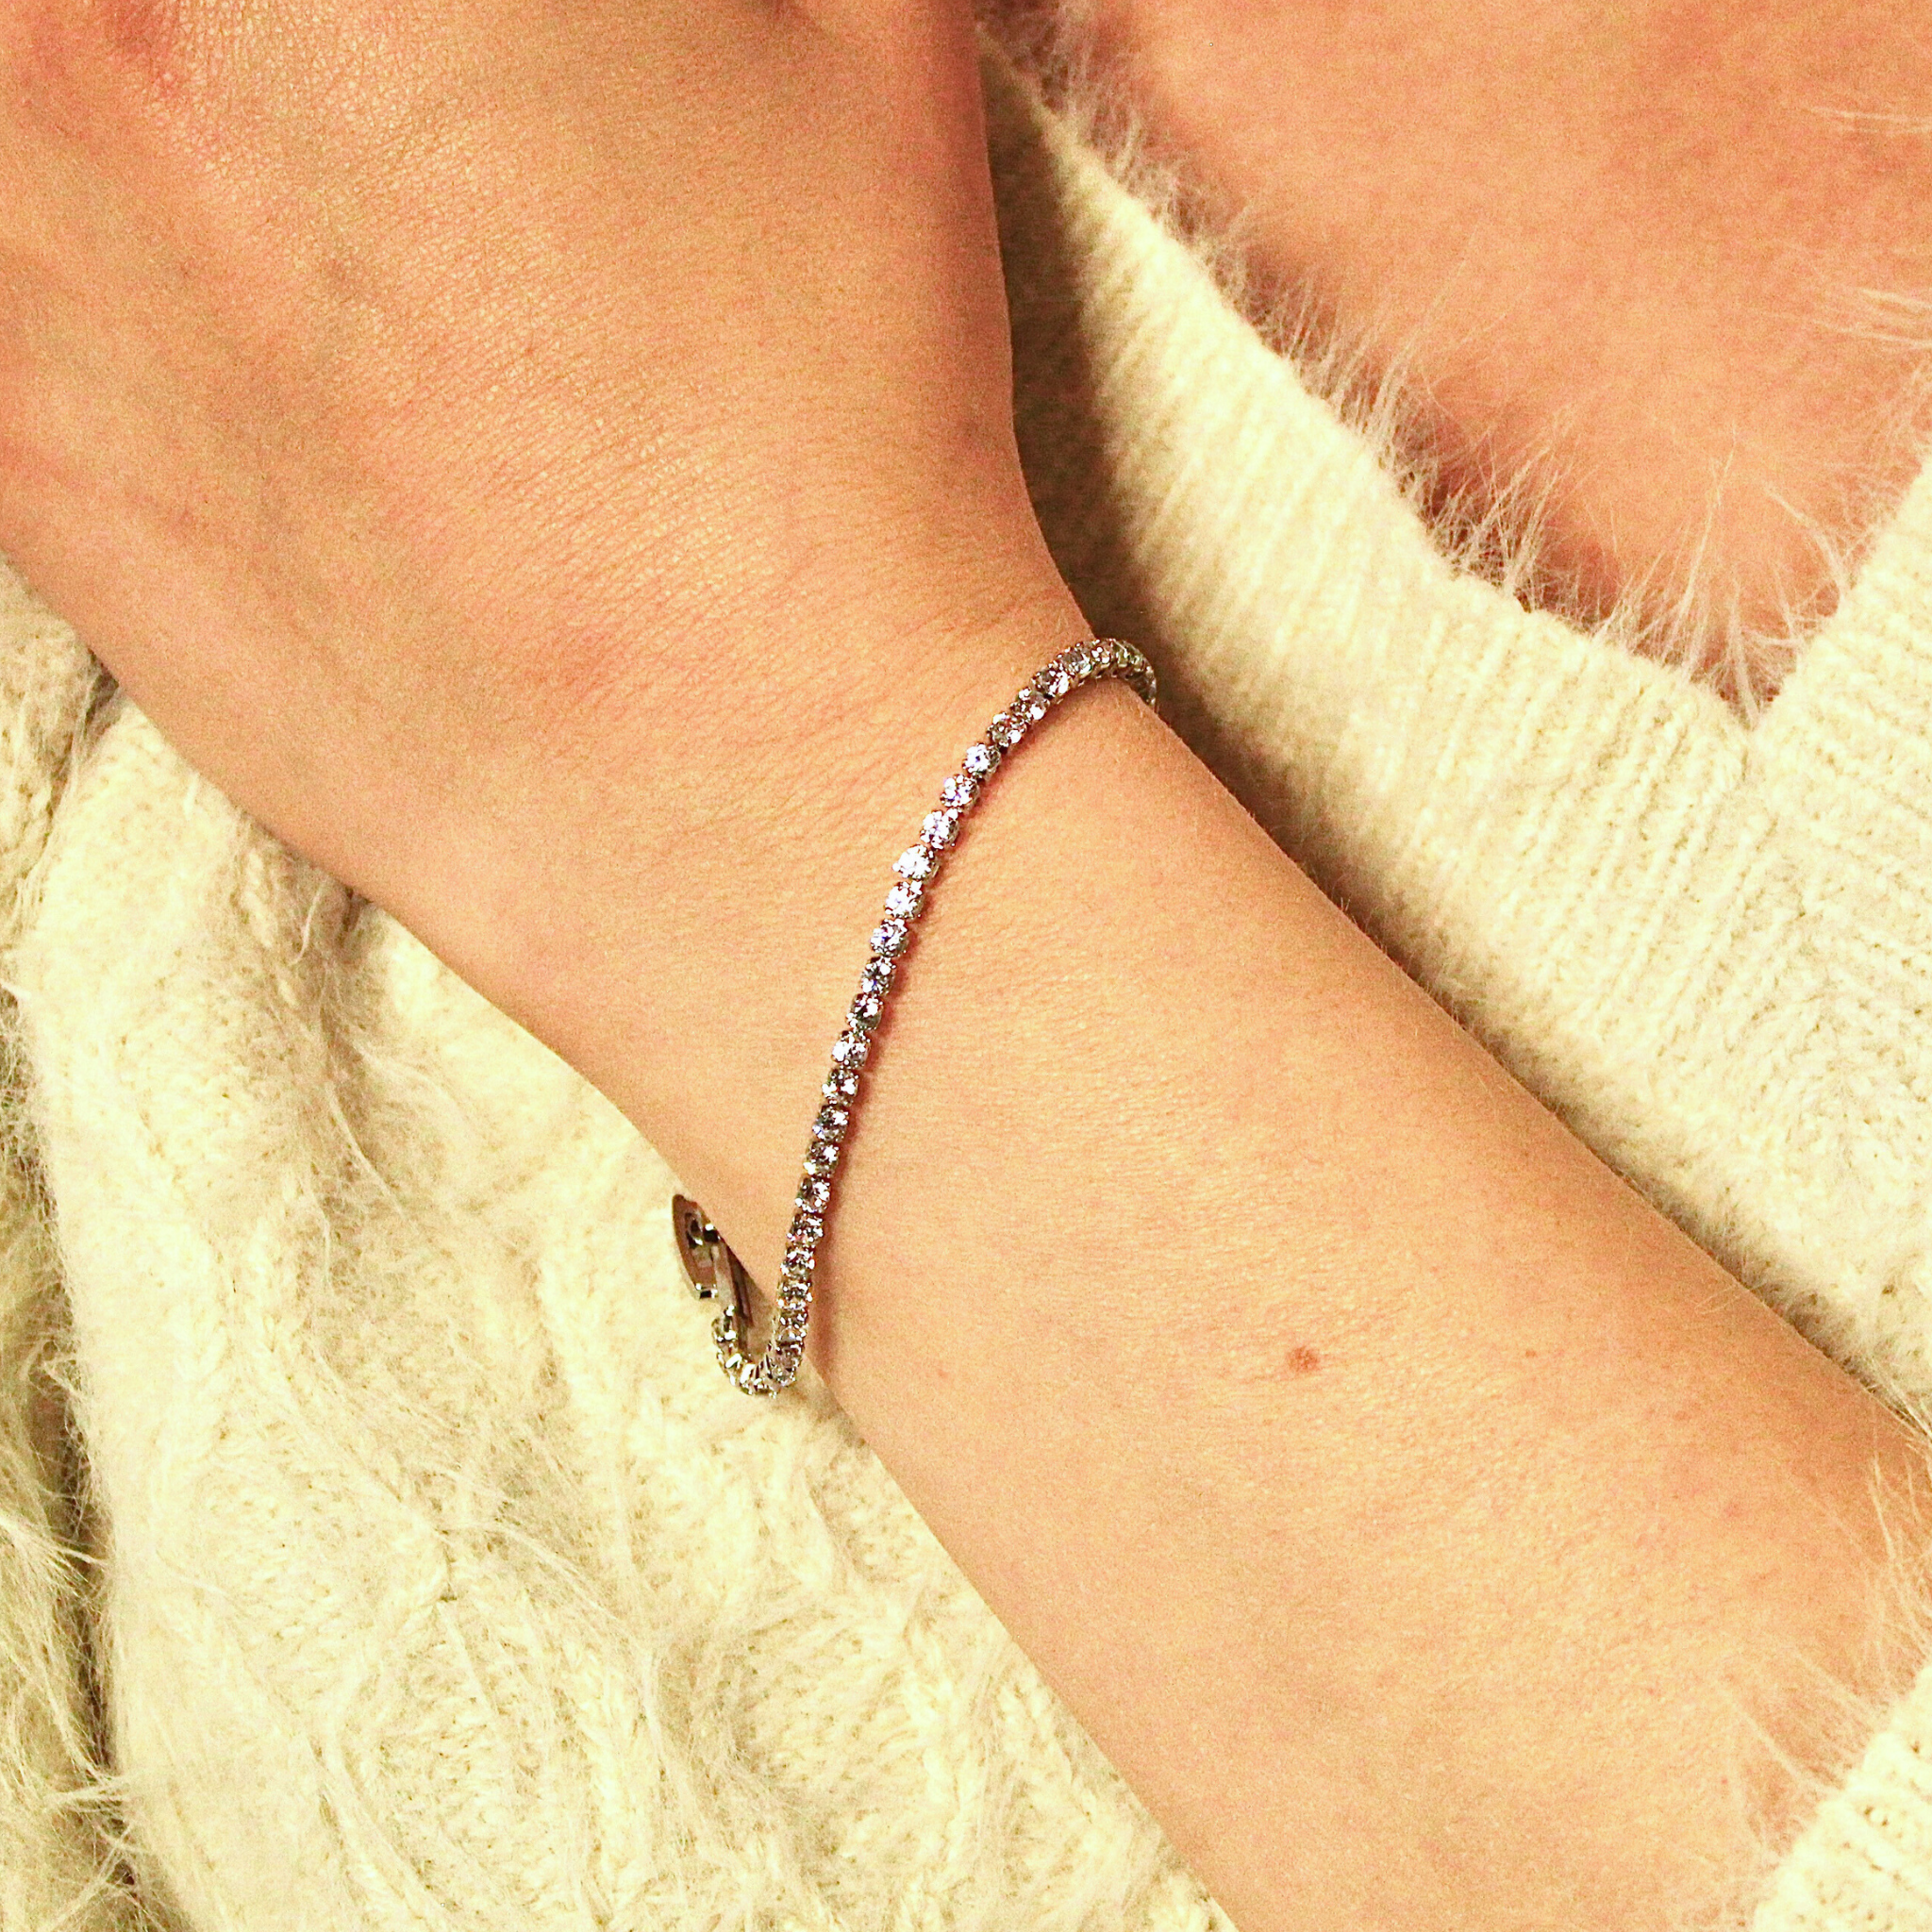 Tennis Armband - 3mm | 925 Sterling Silber